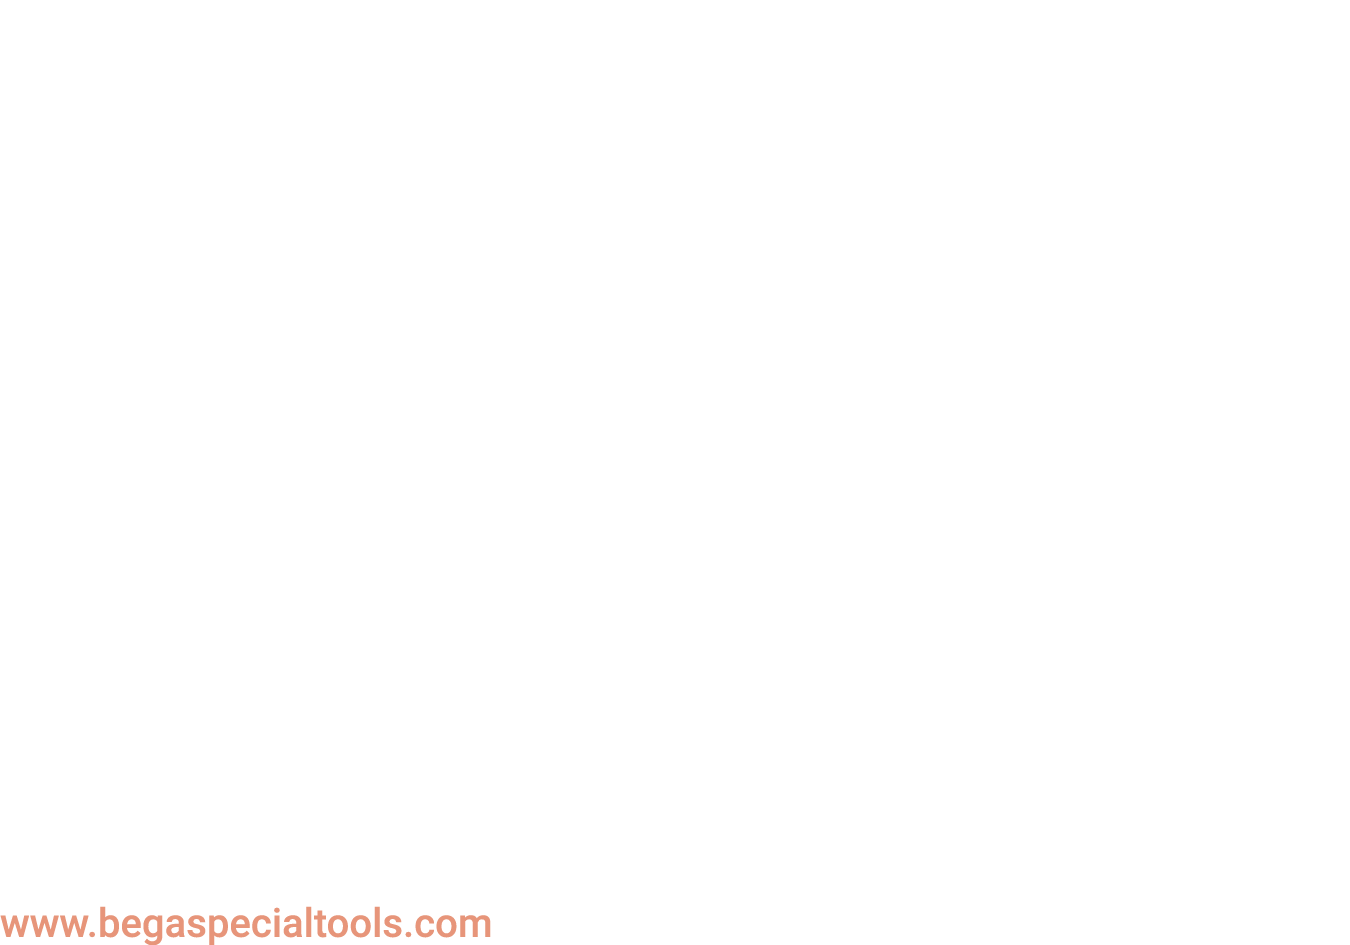 Induction heating specialist Bega Founded in 1978 and headquartered in Vaassen in The Netherlands, Bega Special Tools   